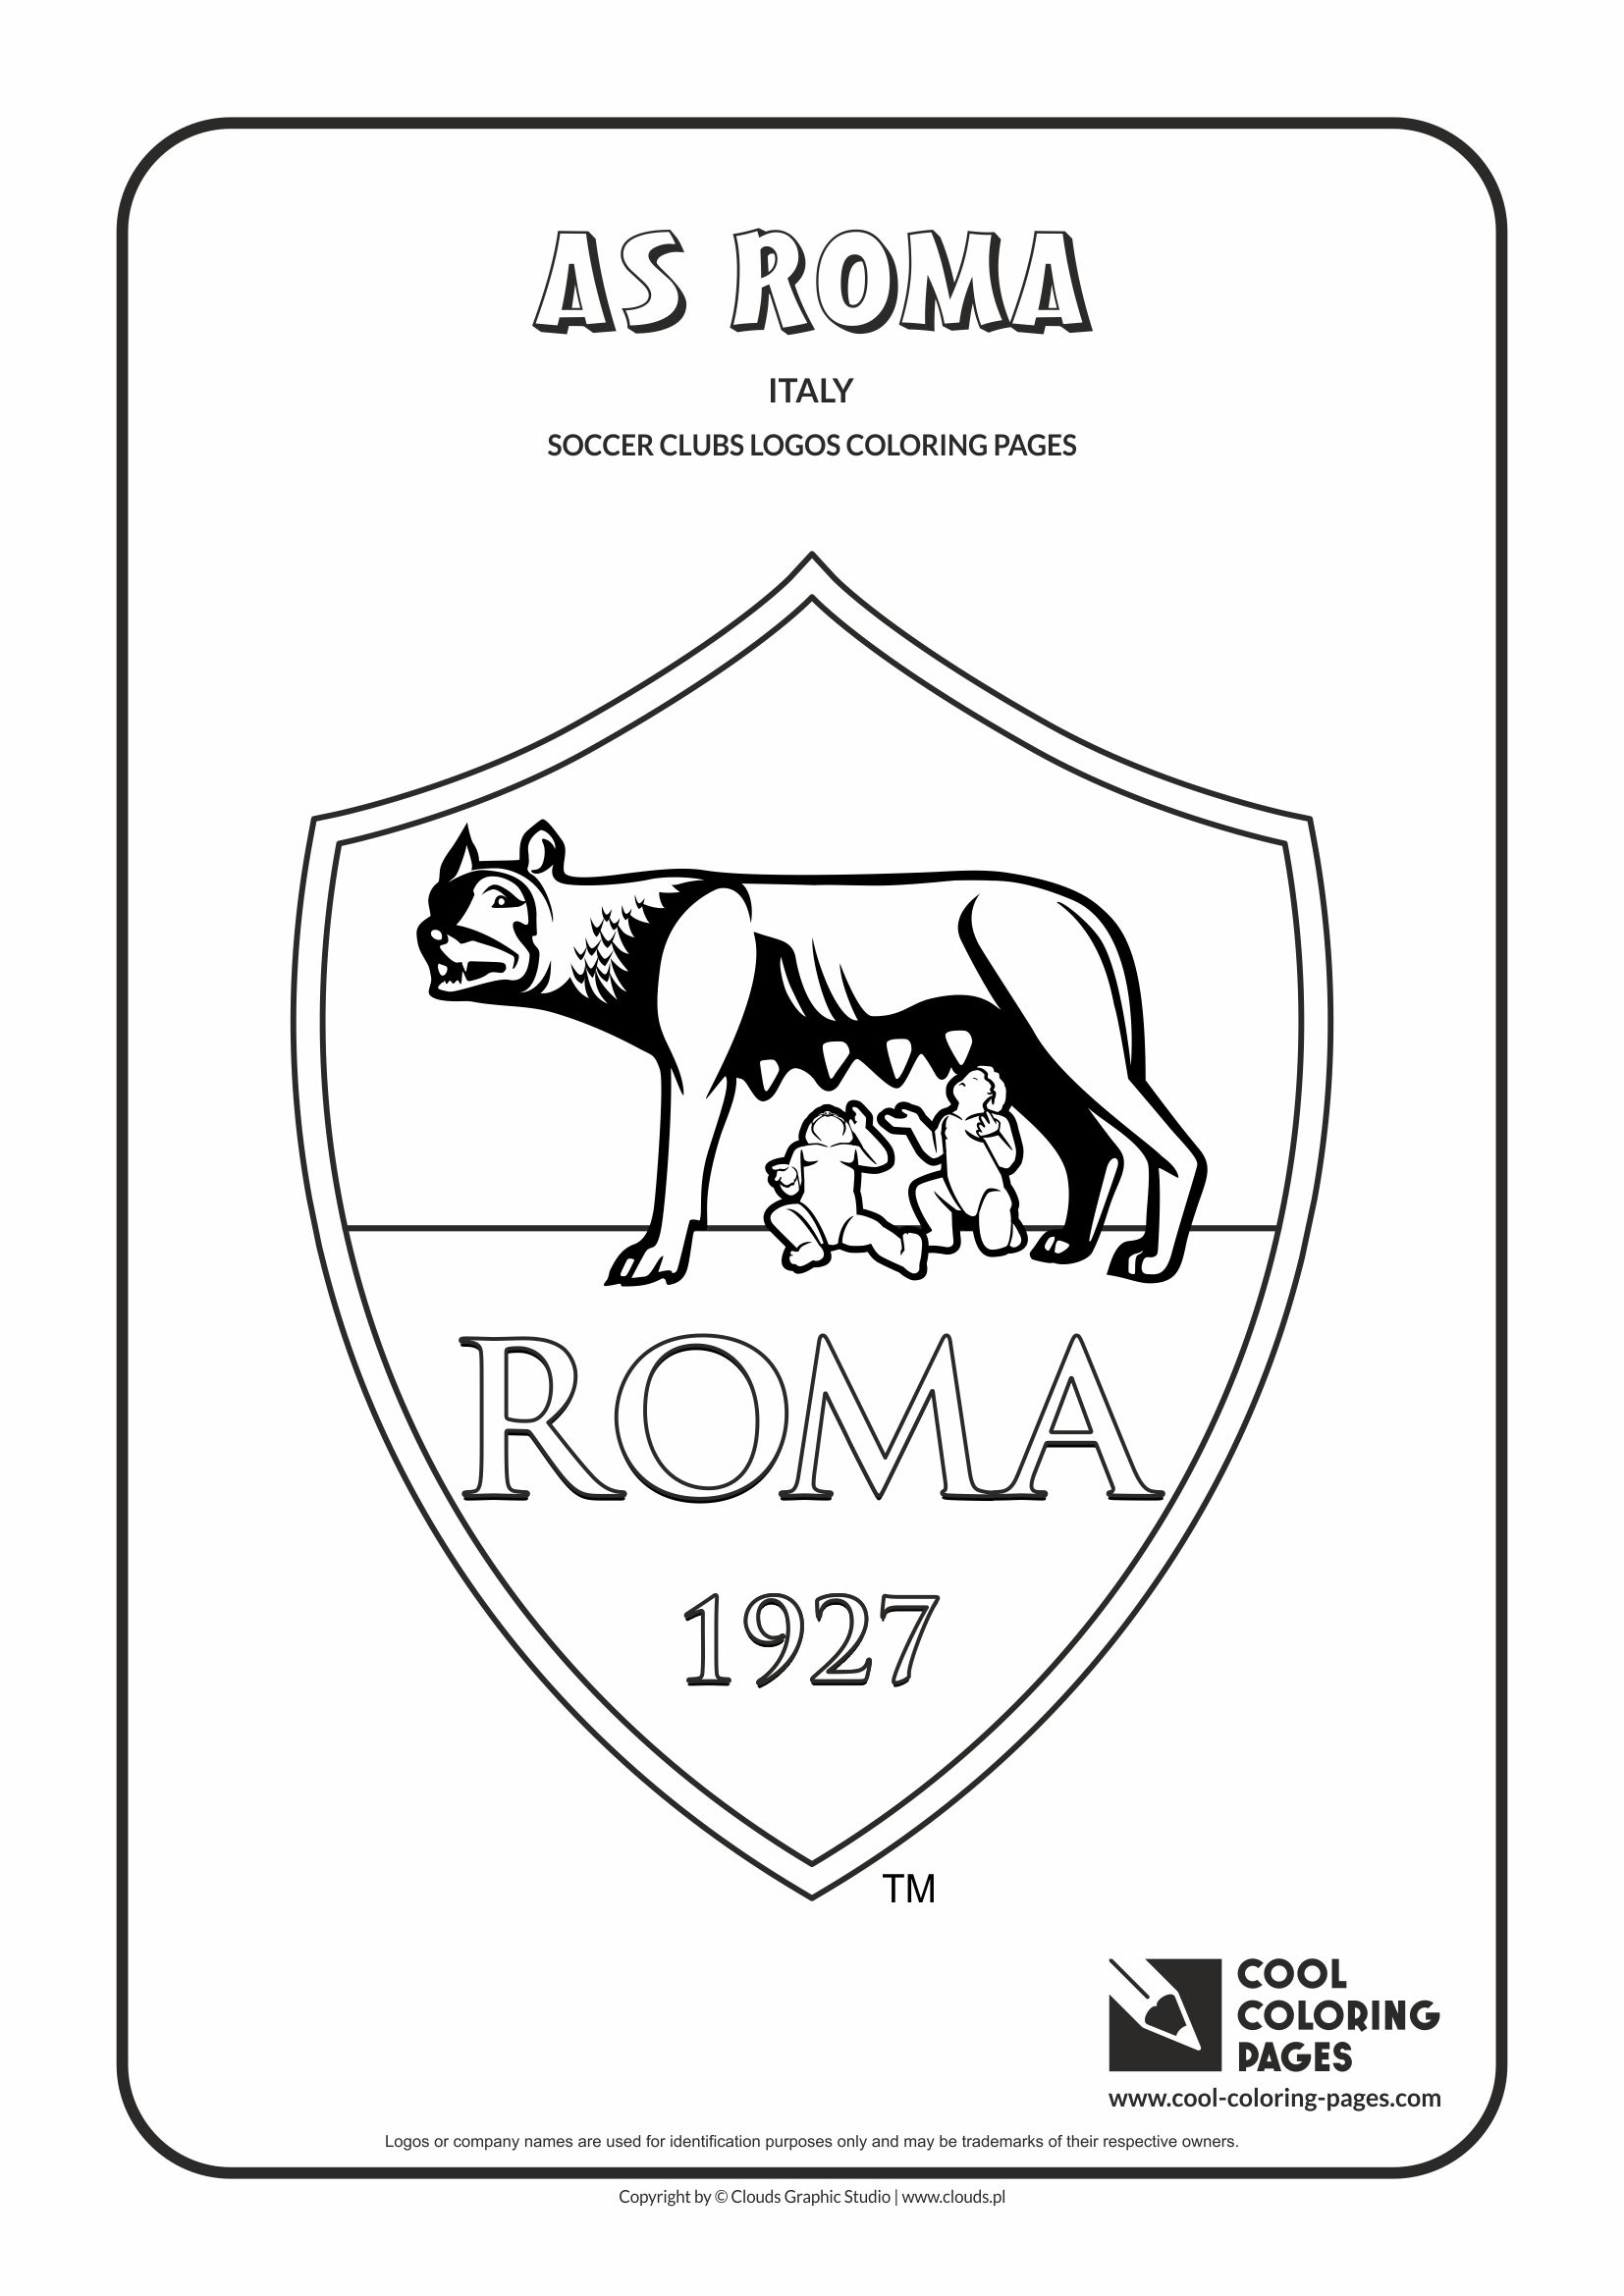 A.S. Roma logo coloring / Coloring page with A.S. Roma logo / Roma logo colouring page.